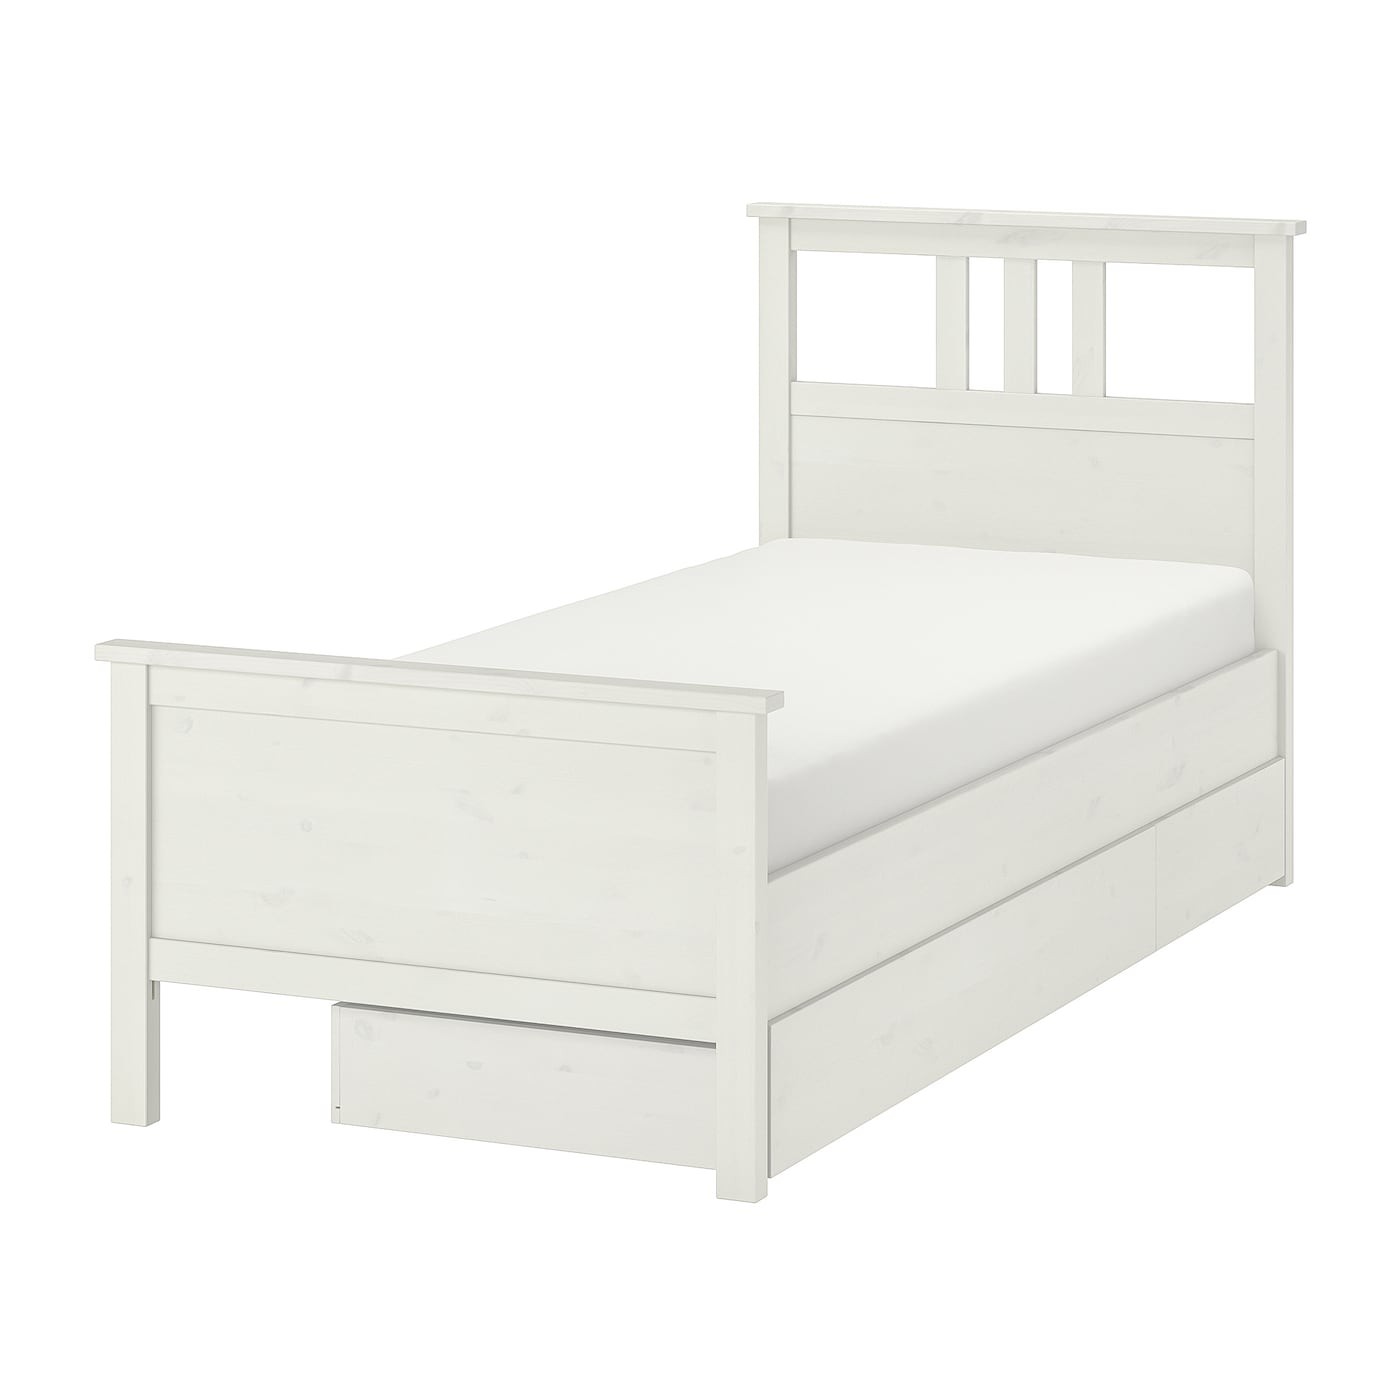 HEMNES Bed frame with 2 storage boxes